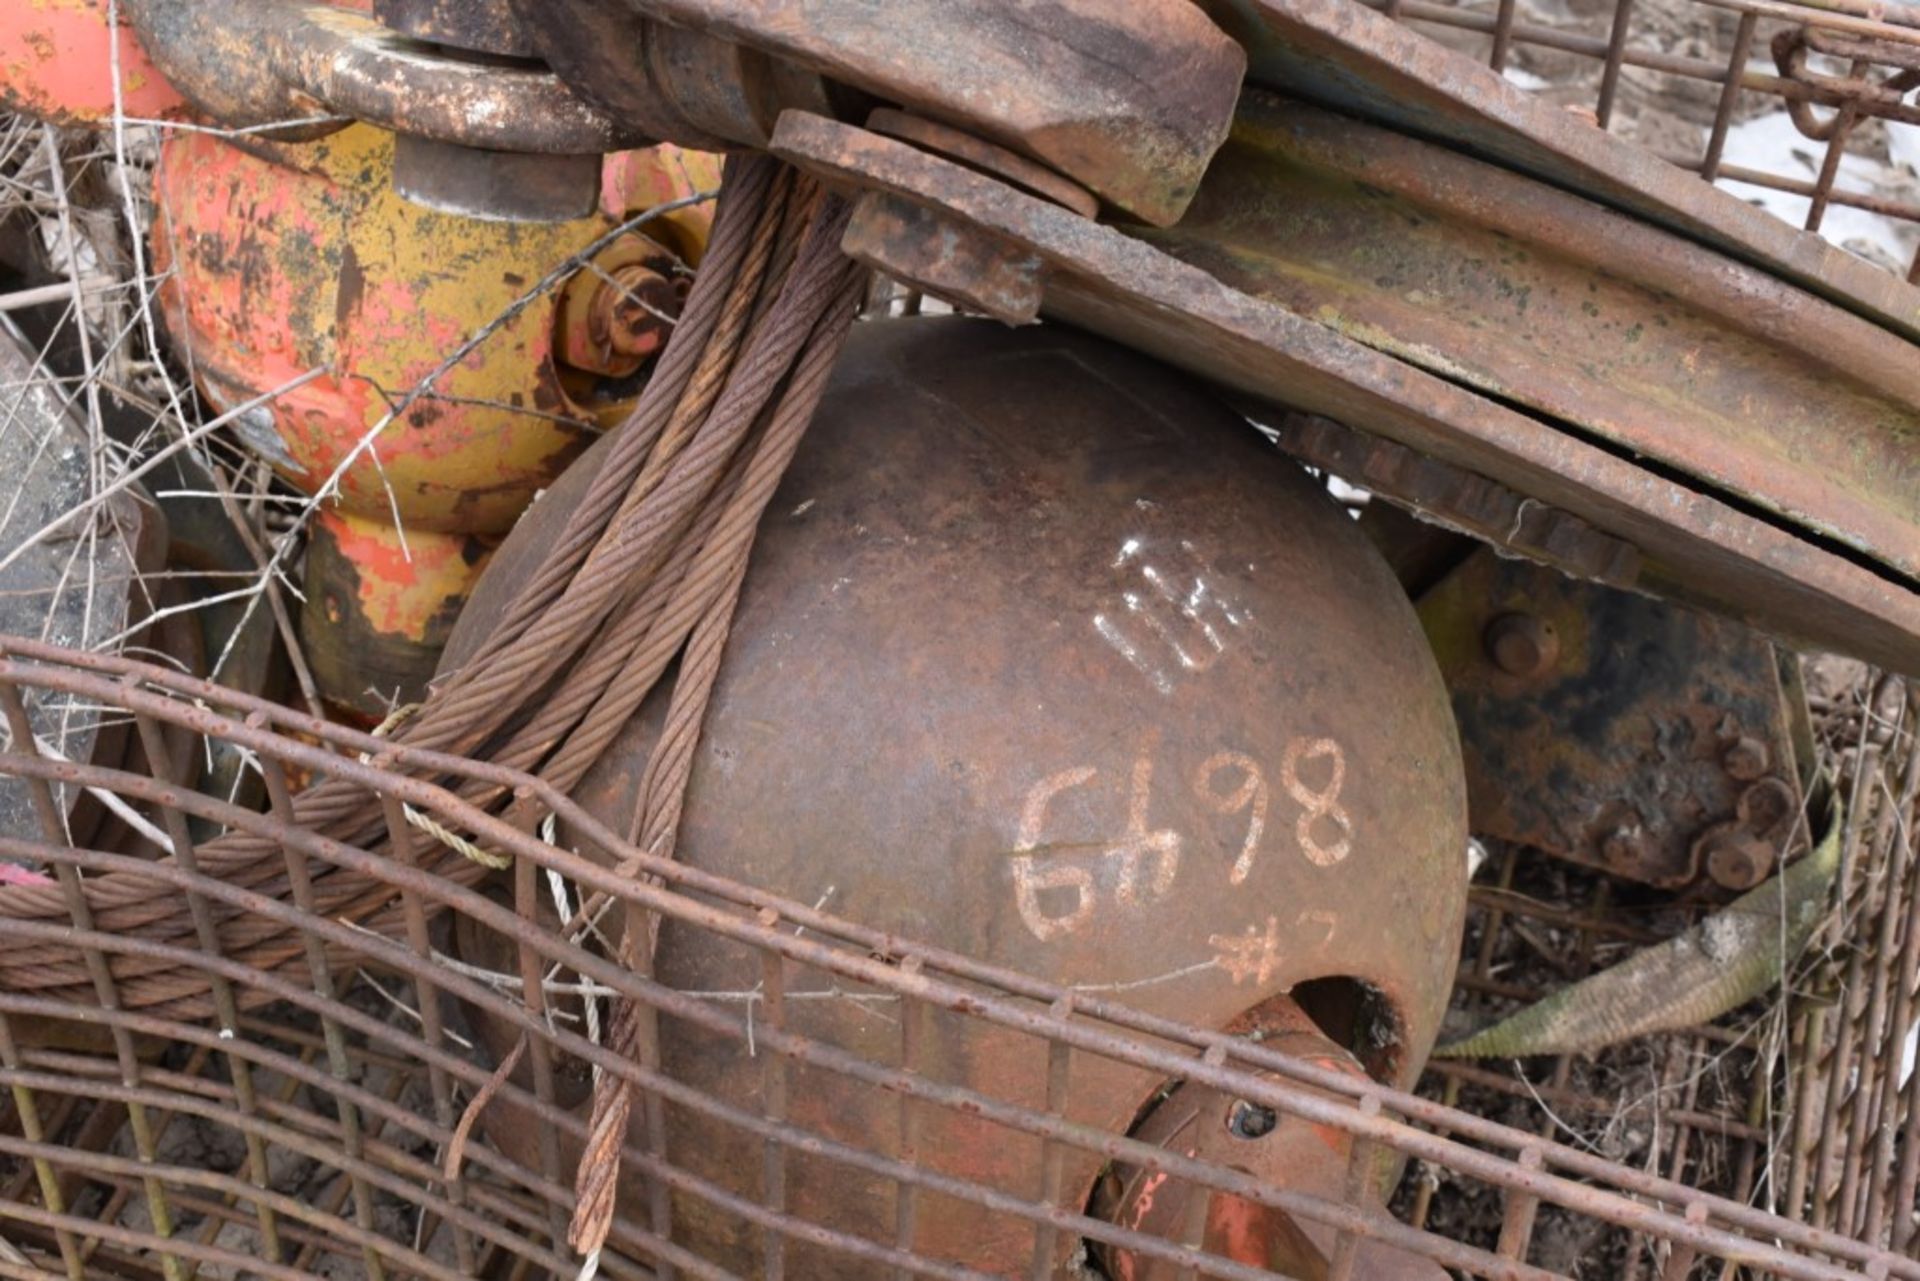 Metal Crate with 15 Ton Crane Hook, Probably a 25 Ton Crane Hook and Large Crane Pulley - Image 4 of 8